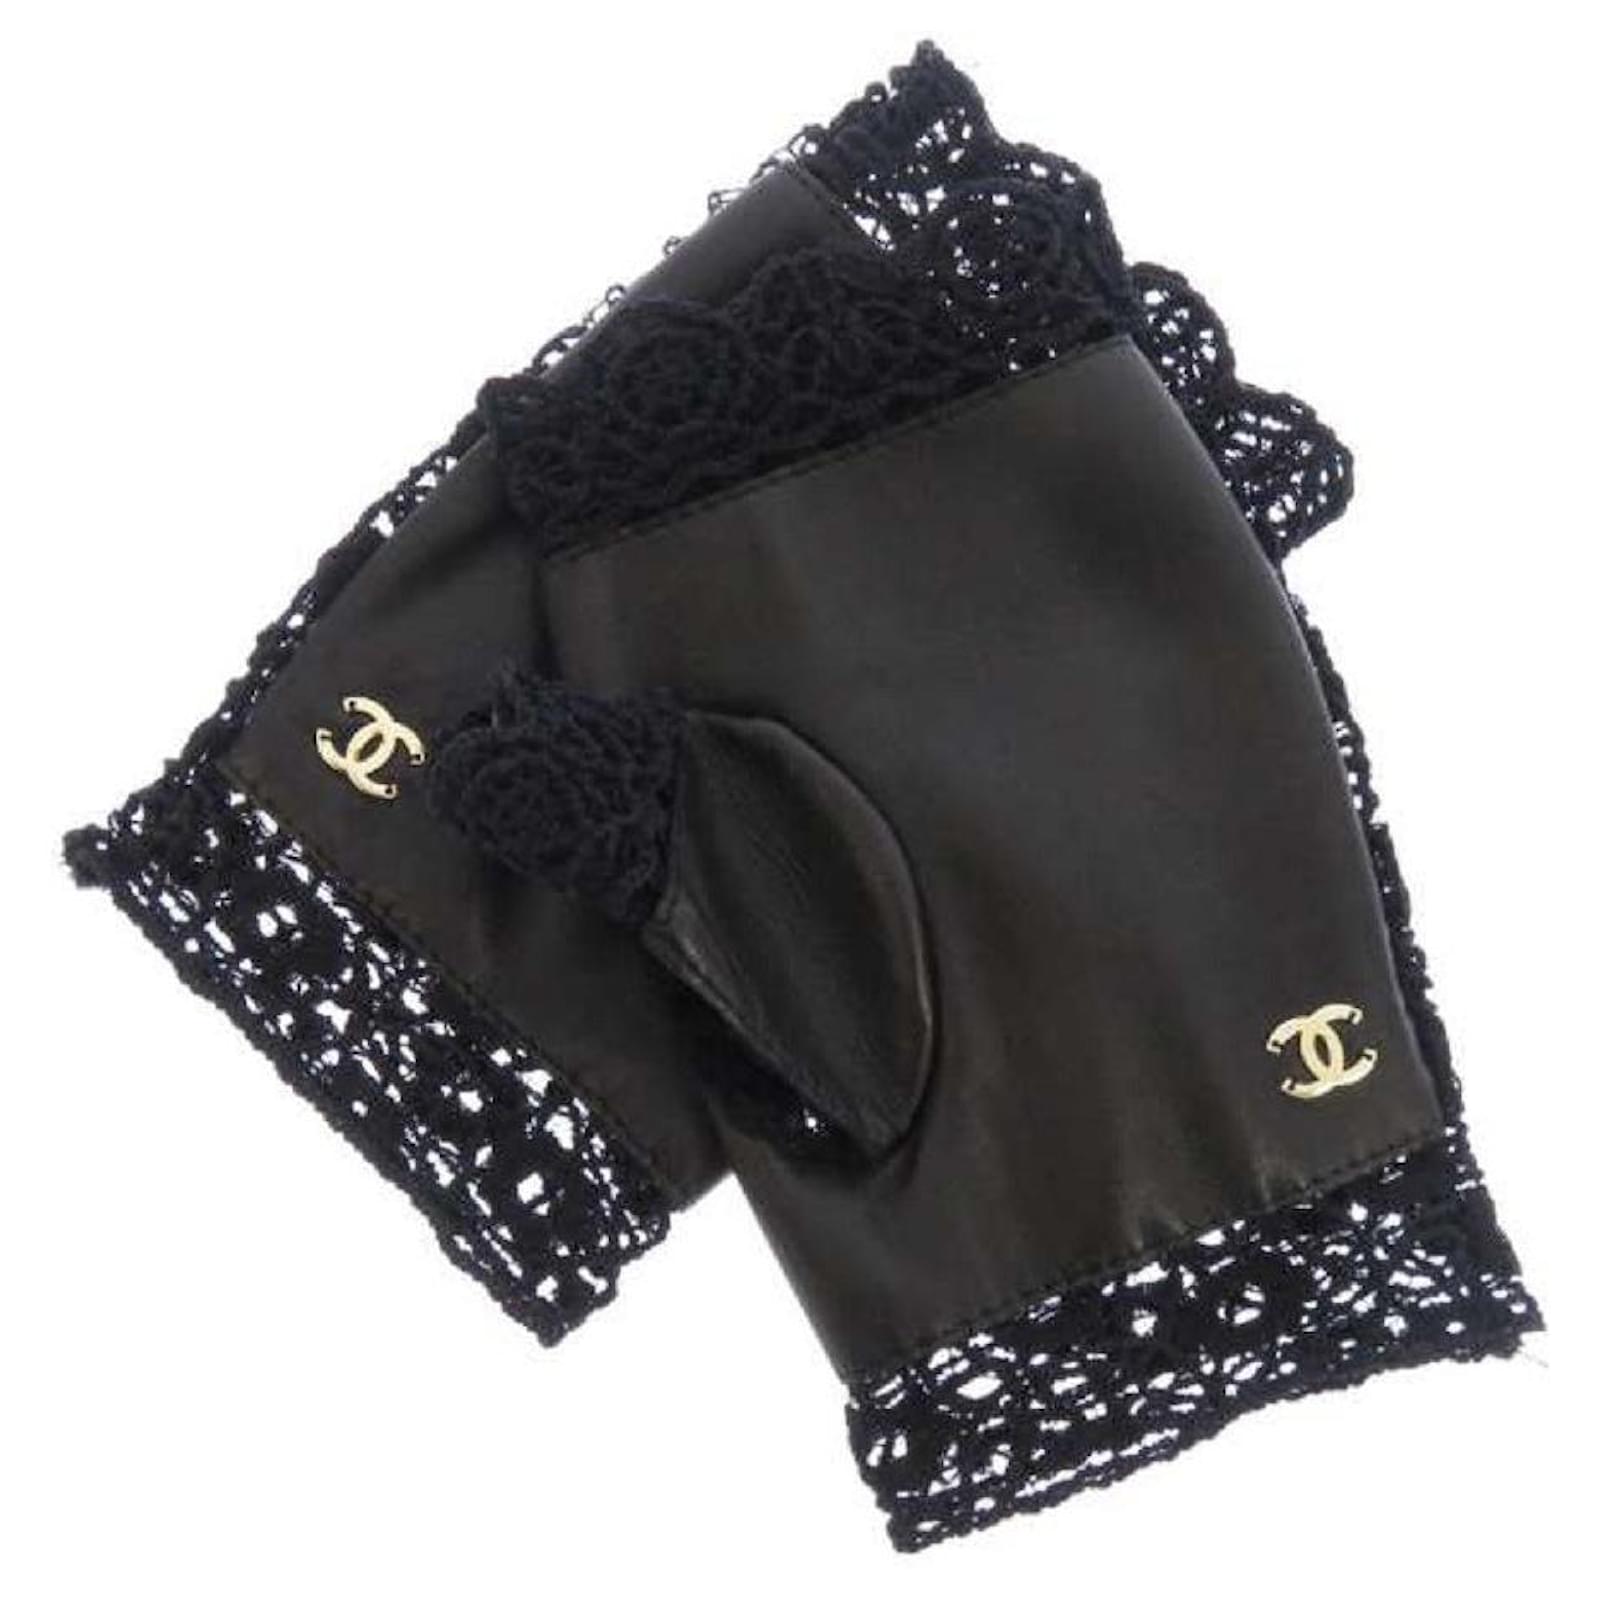 Chanel fingerless glove with a signature jewel accent  Fashion  accessories, Chanel gloves, Chanel accessories